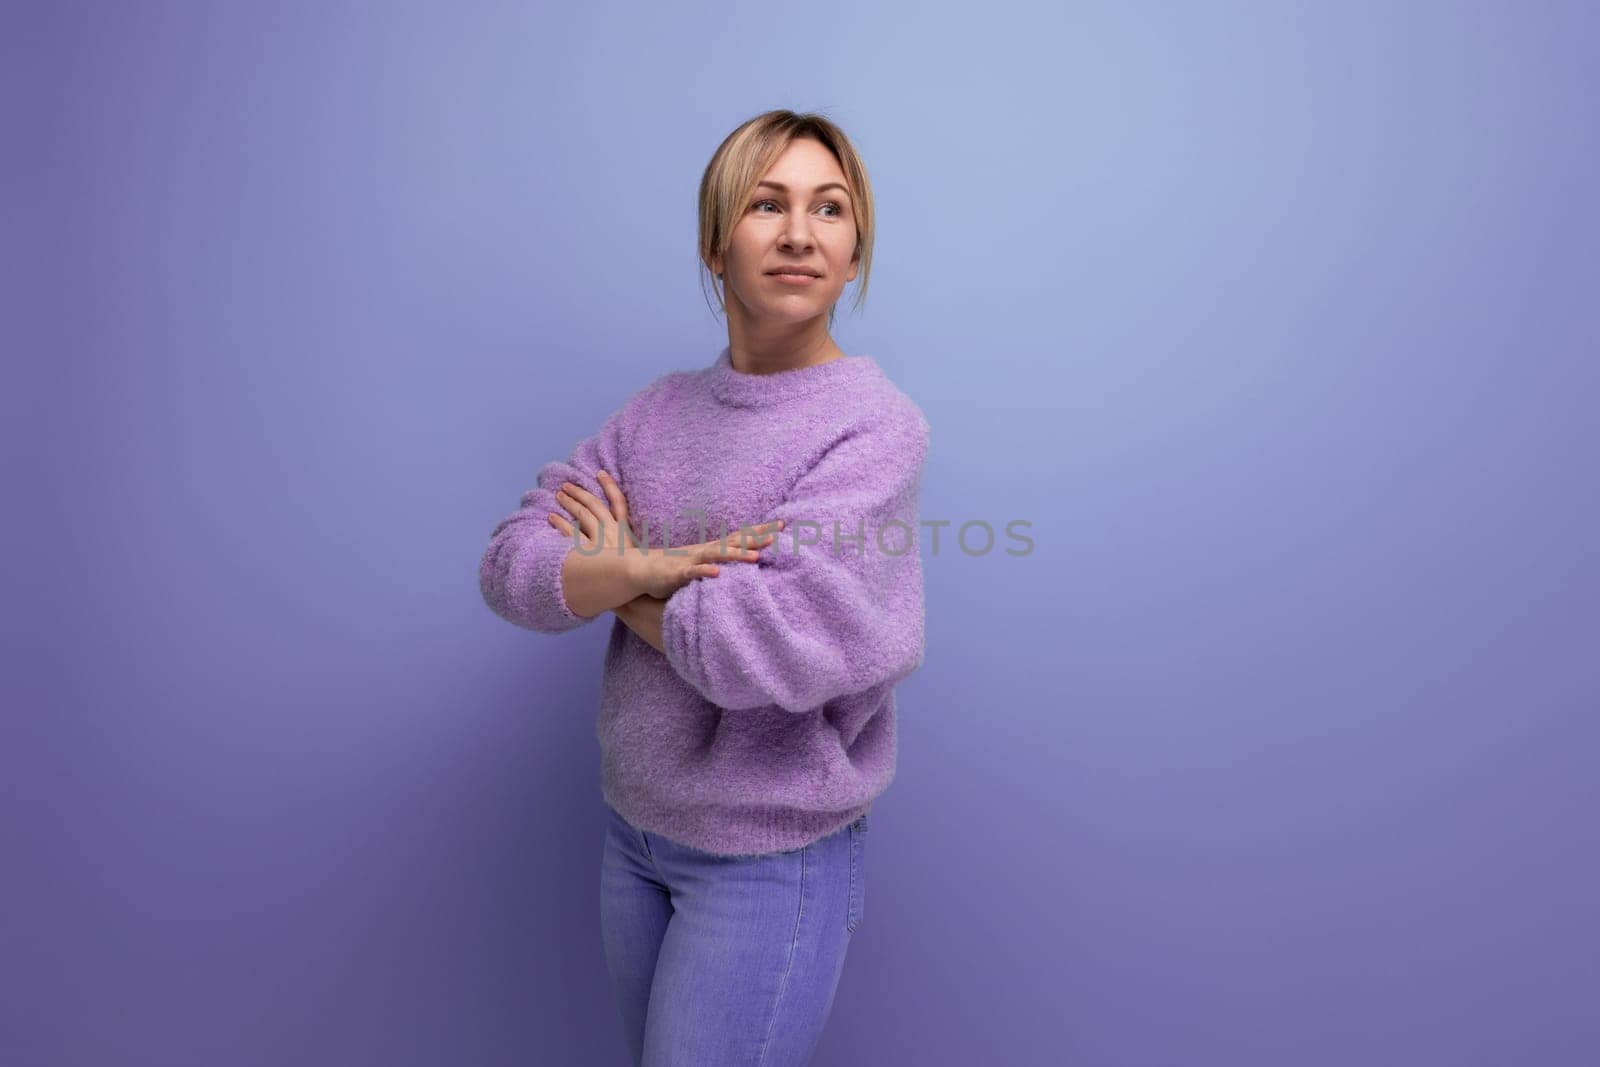 portrait of a charming cute blondie woman in a lavender sweater mysteriously looking away on a purple background with copy space.